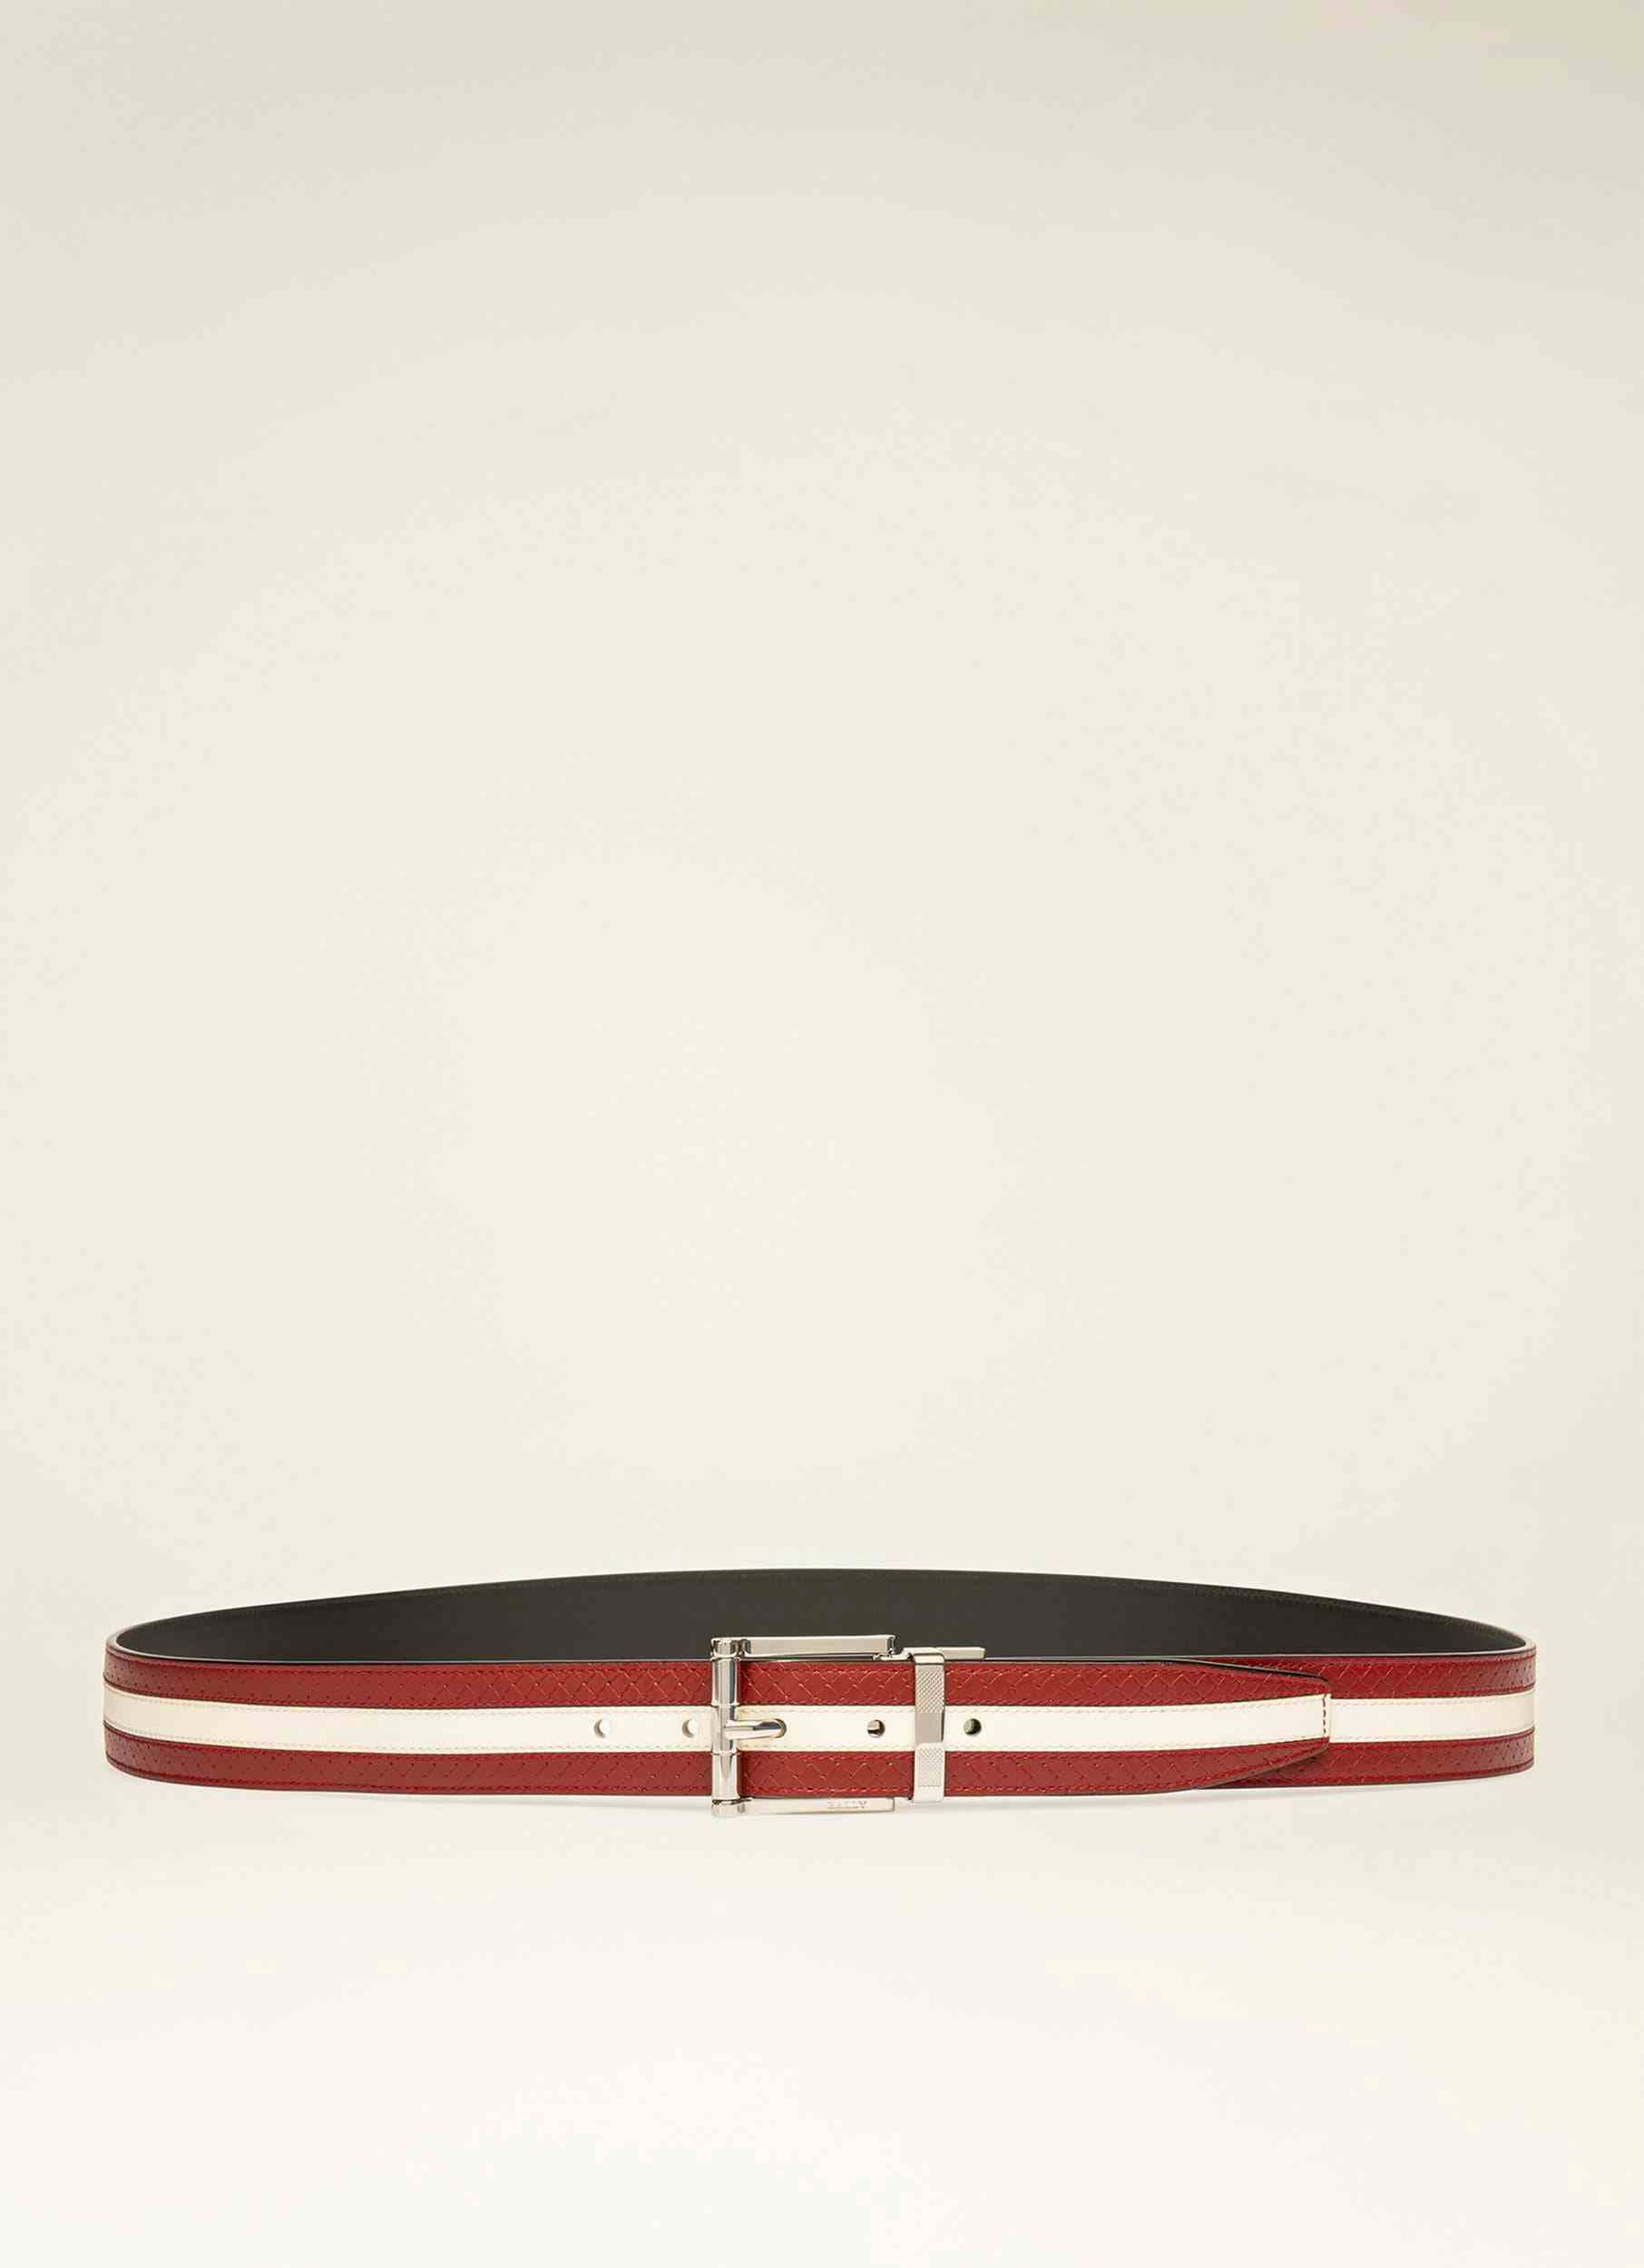 CASUAL Leather 35Mm Belt In Bally Red & Black - Men's - Bally